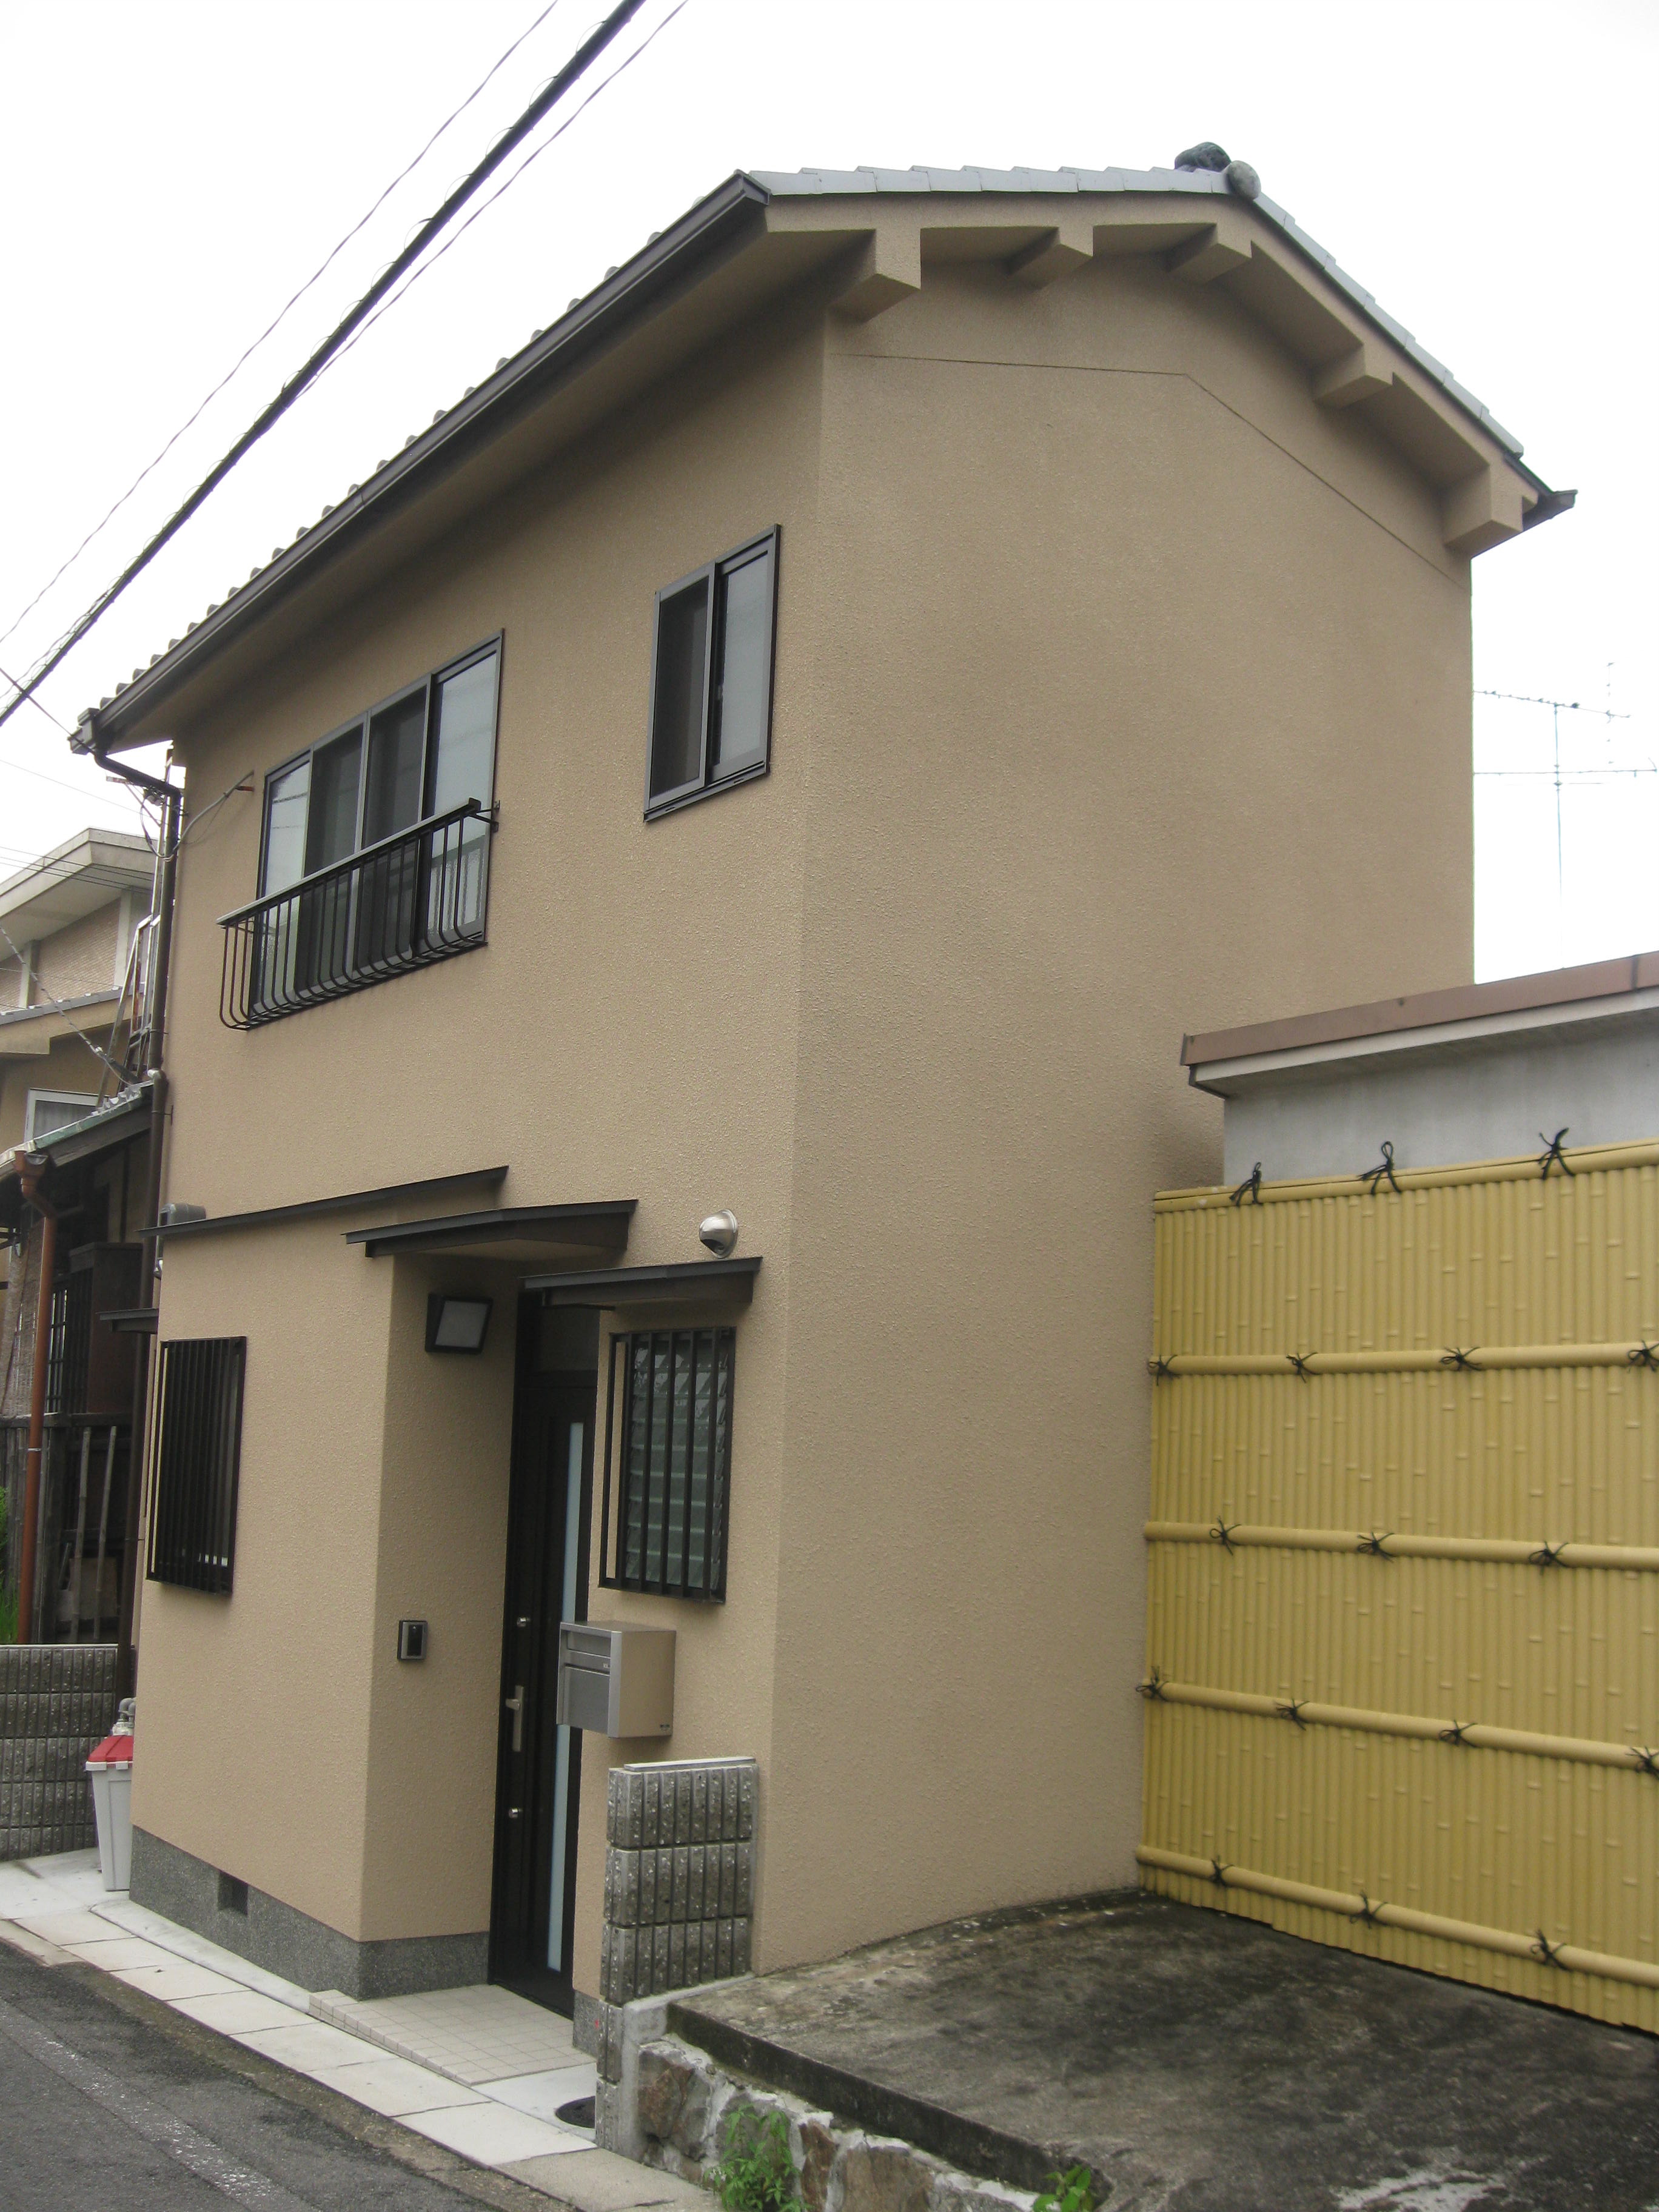 Typical home in Japan